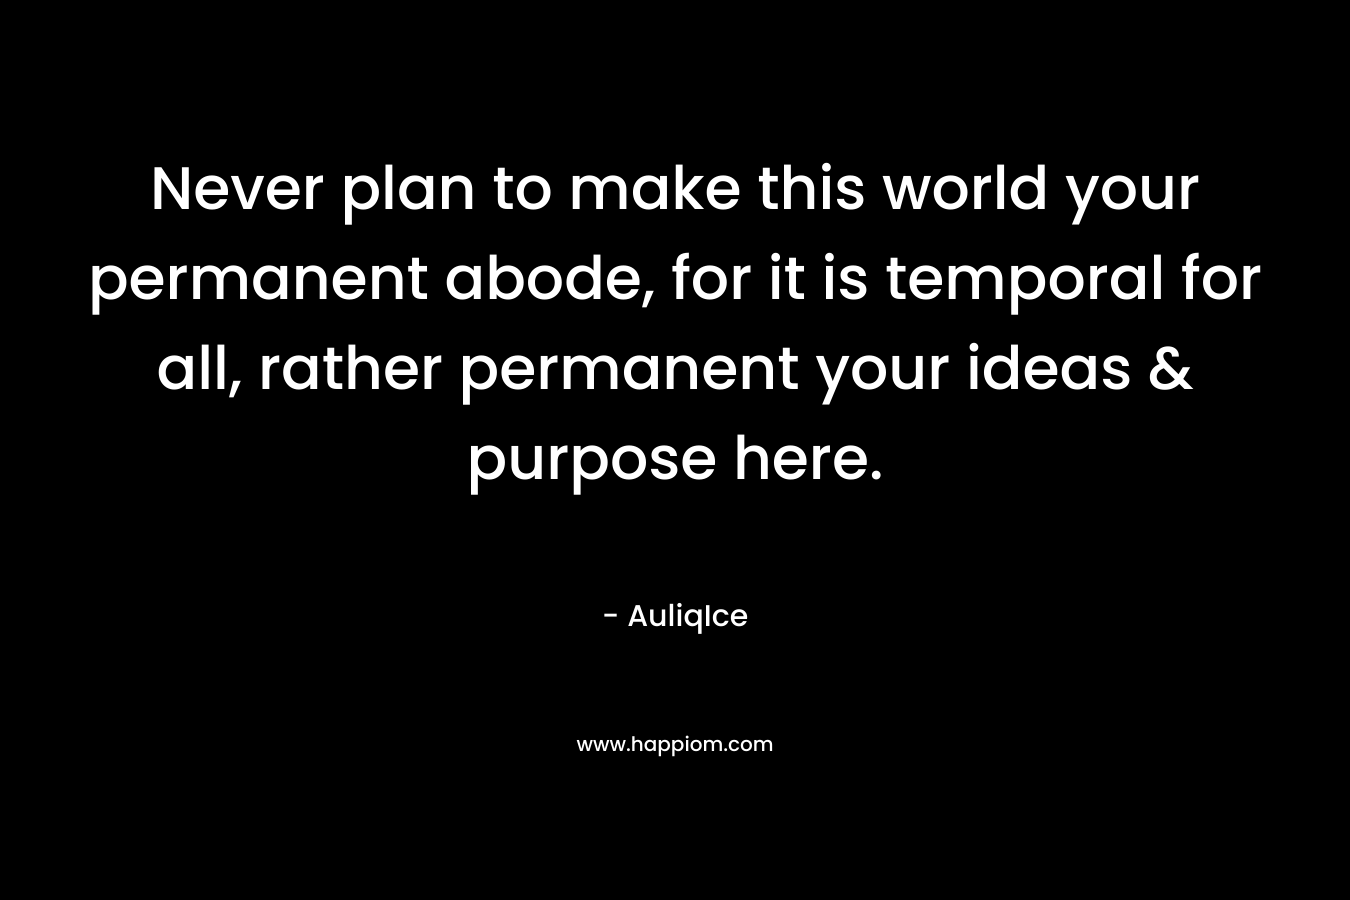 Never plan to make this world your permanent abode, for it is temporal for all, rather permanent your ideas & purpose here.